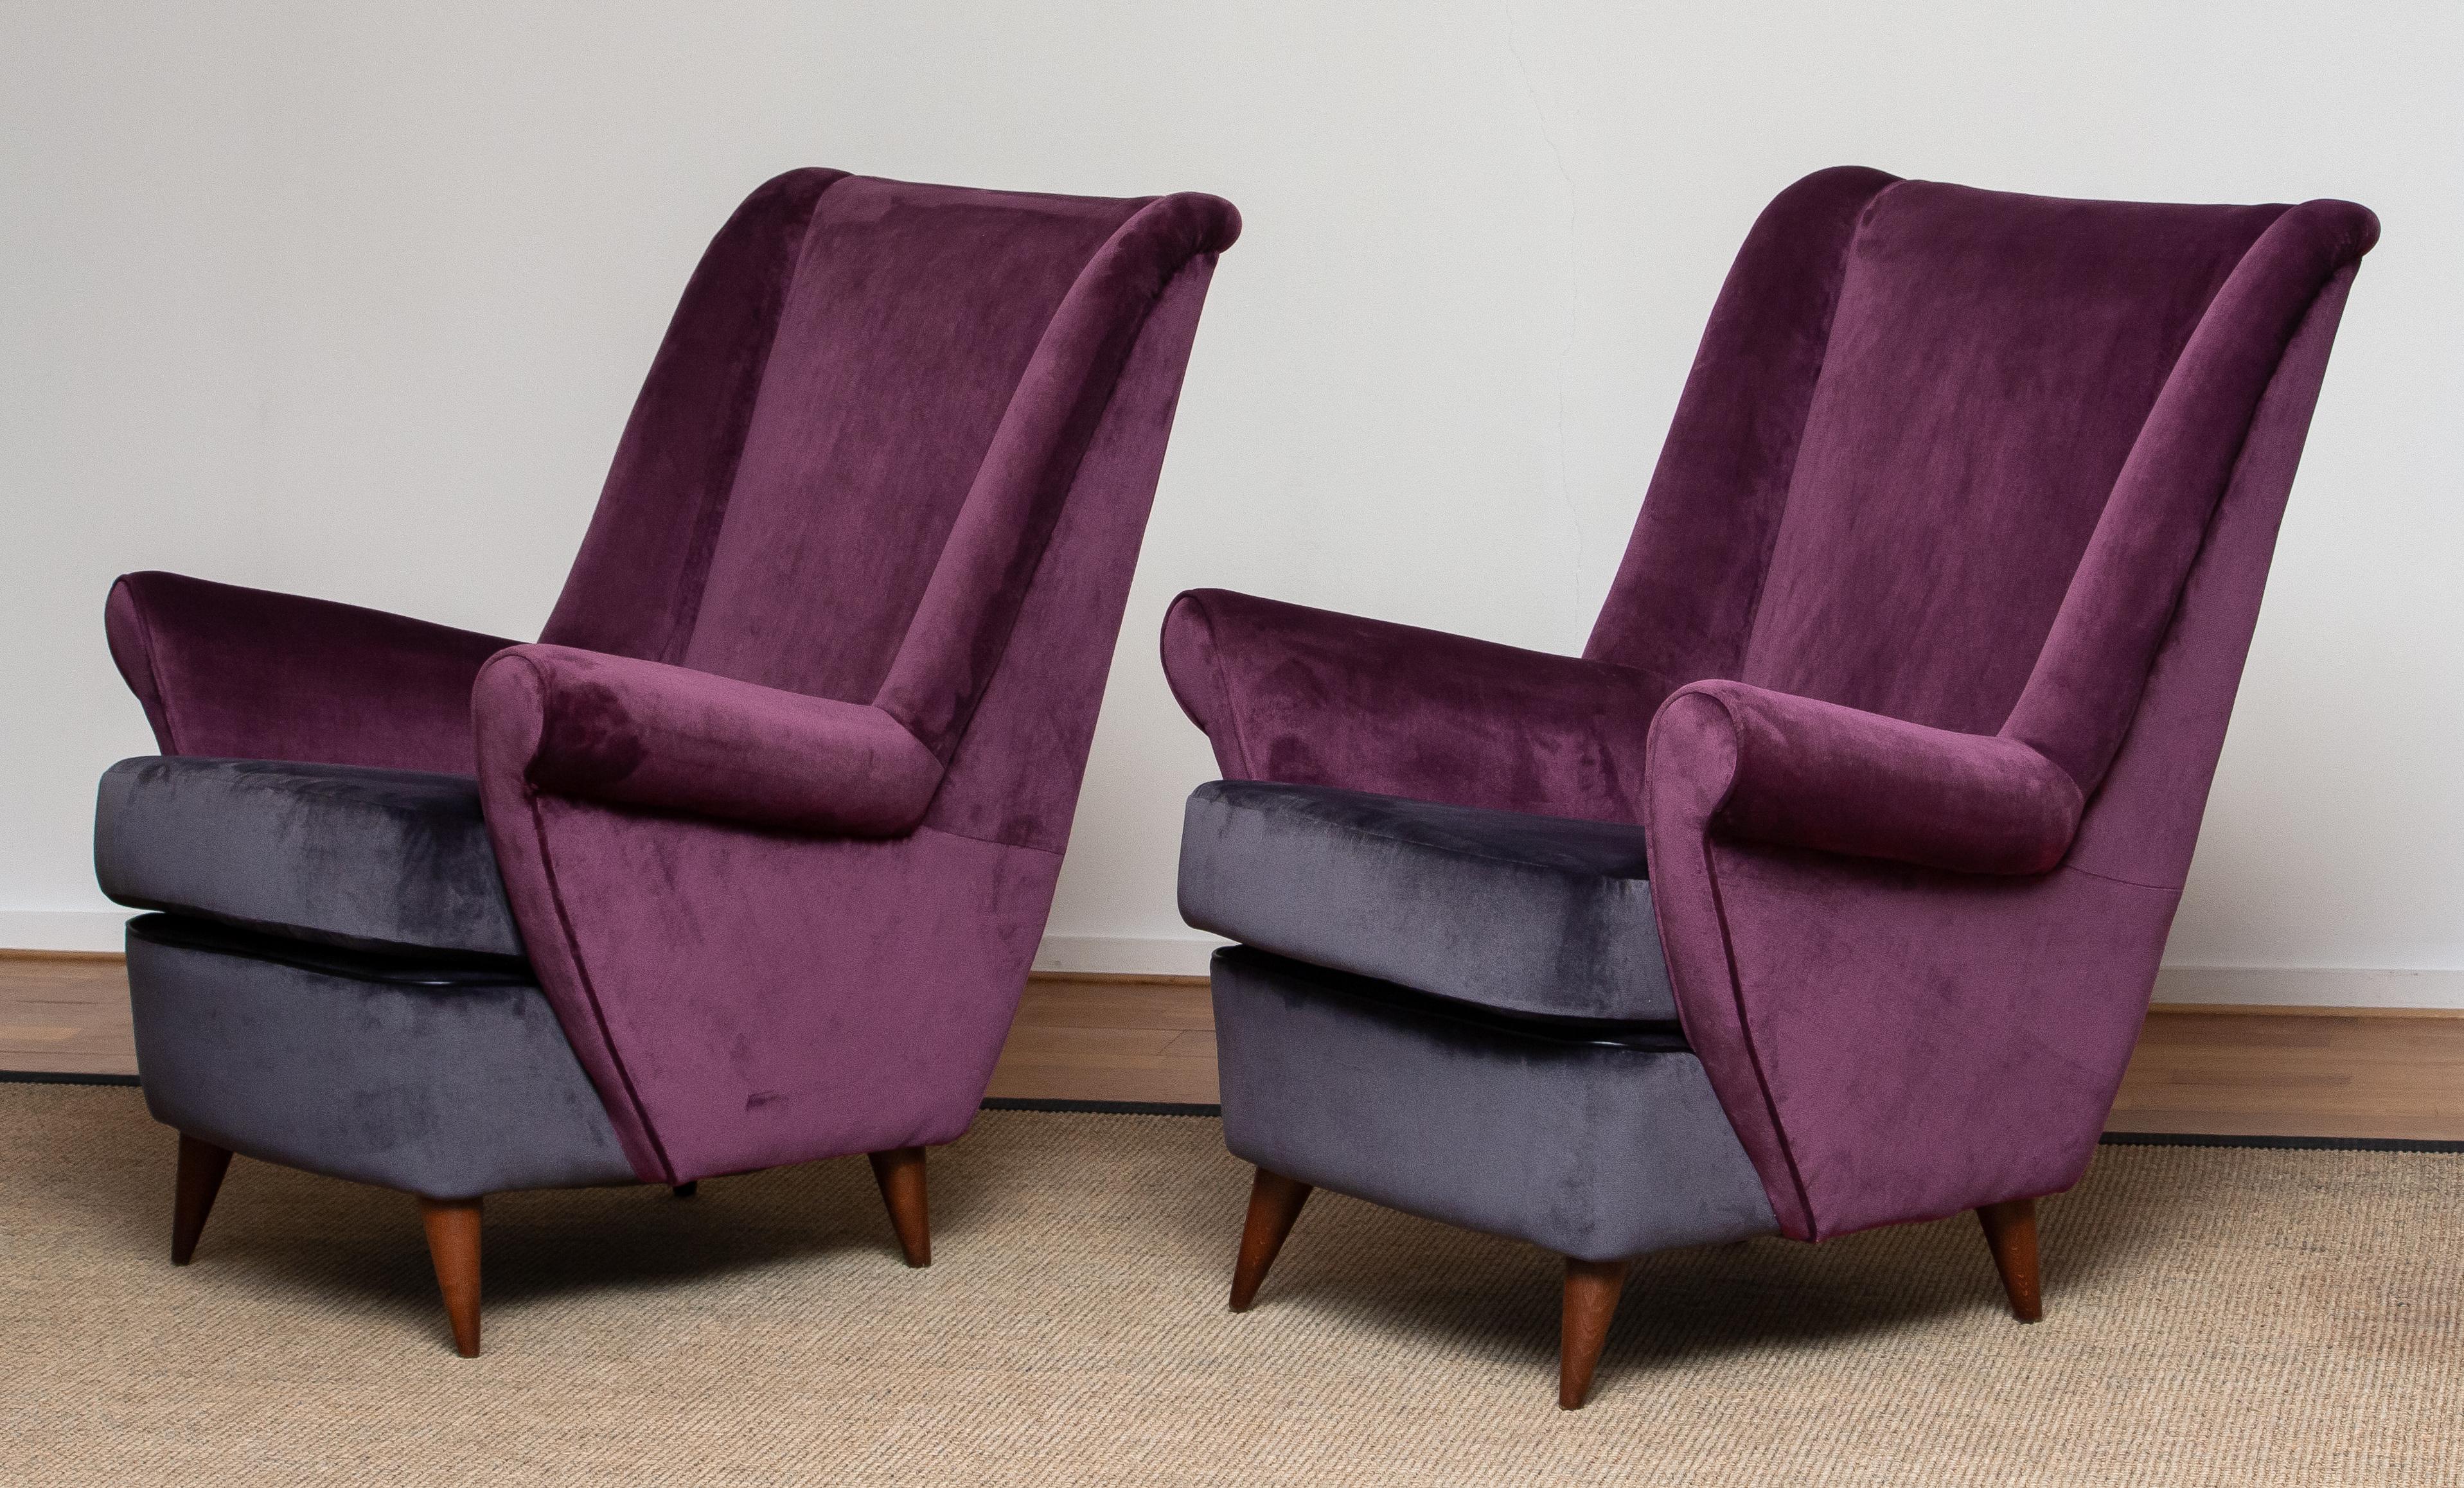 Mid-20th Century 1950s Pair of Lounge / Easy Chairs Designed Gio Ponti Made by ISA Bergamo, Italy